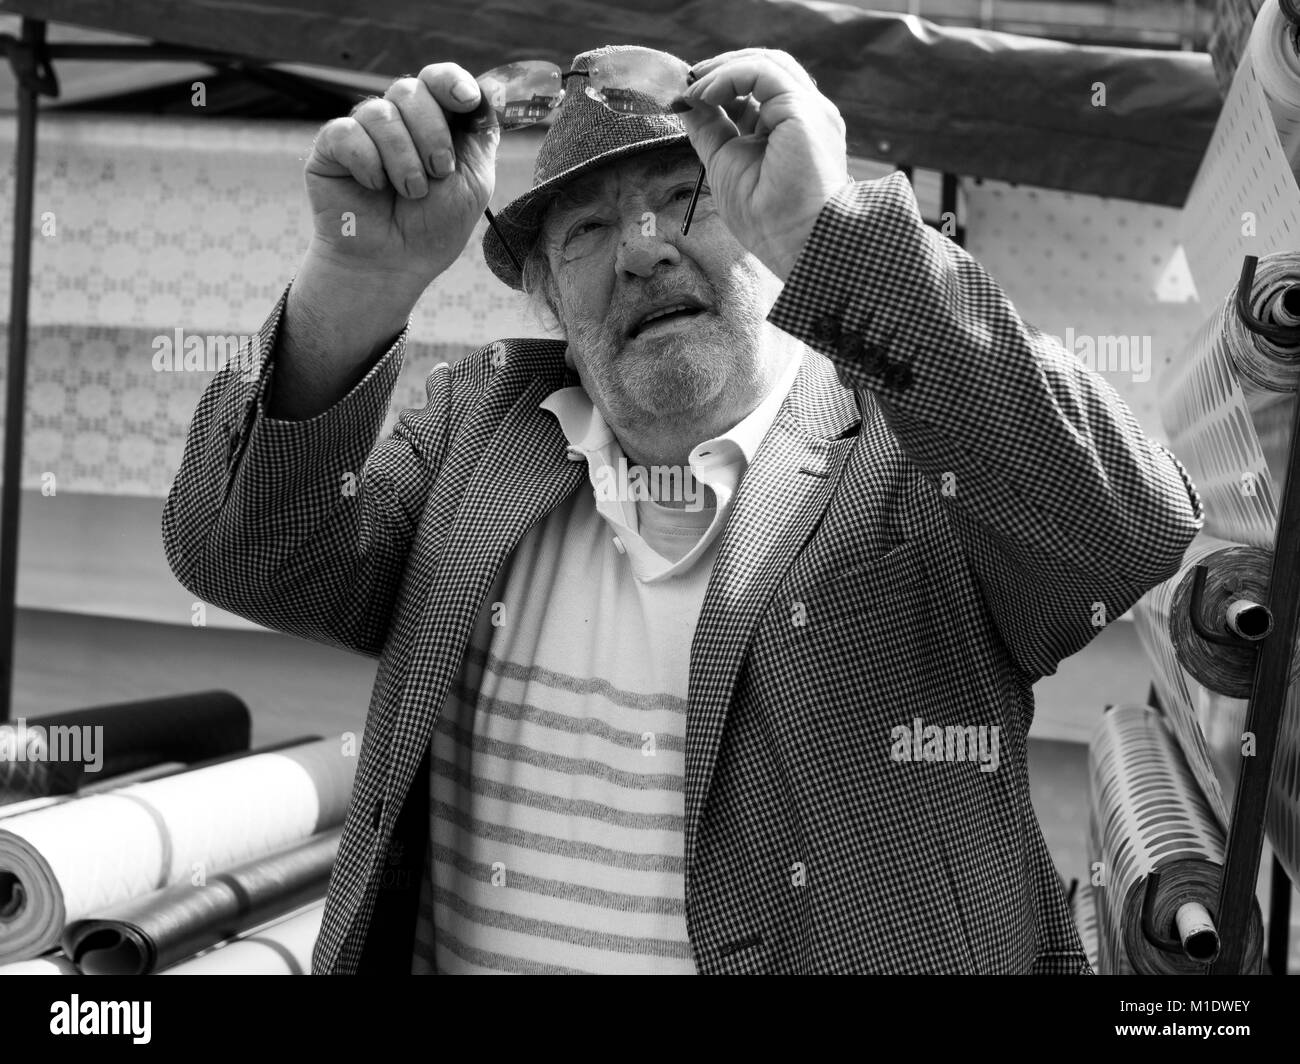 Market trader wearing tweed jacket and hat in front of rolls of fabric looks up at his glasses - Monochrome image Stock Photo